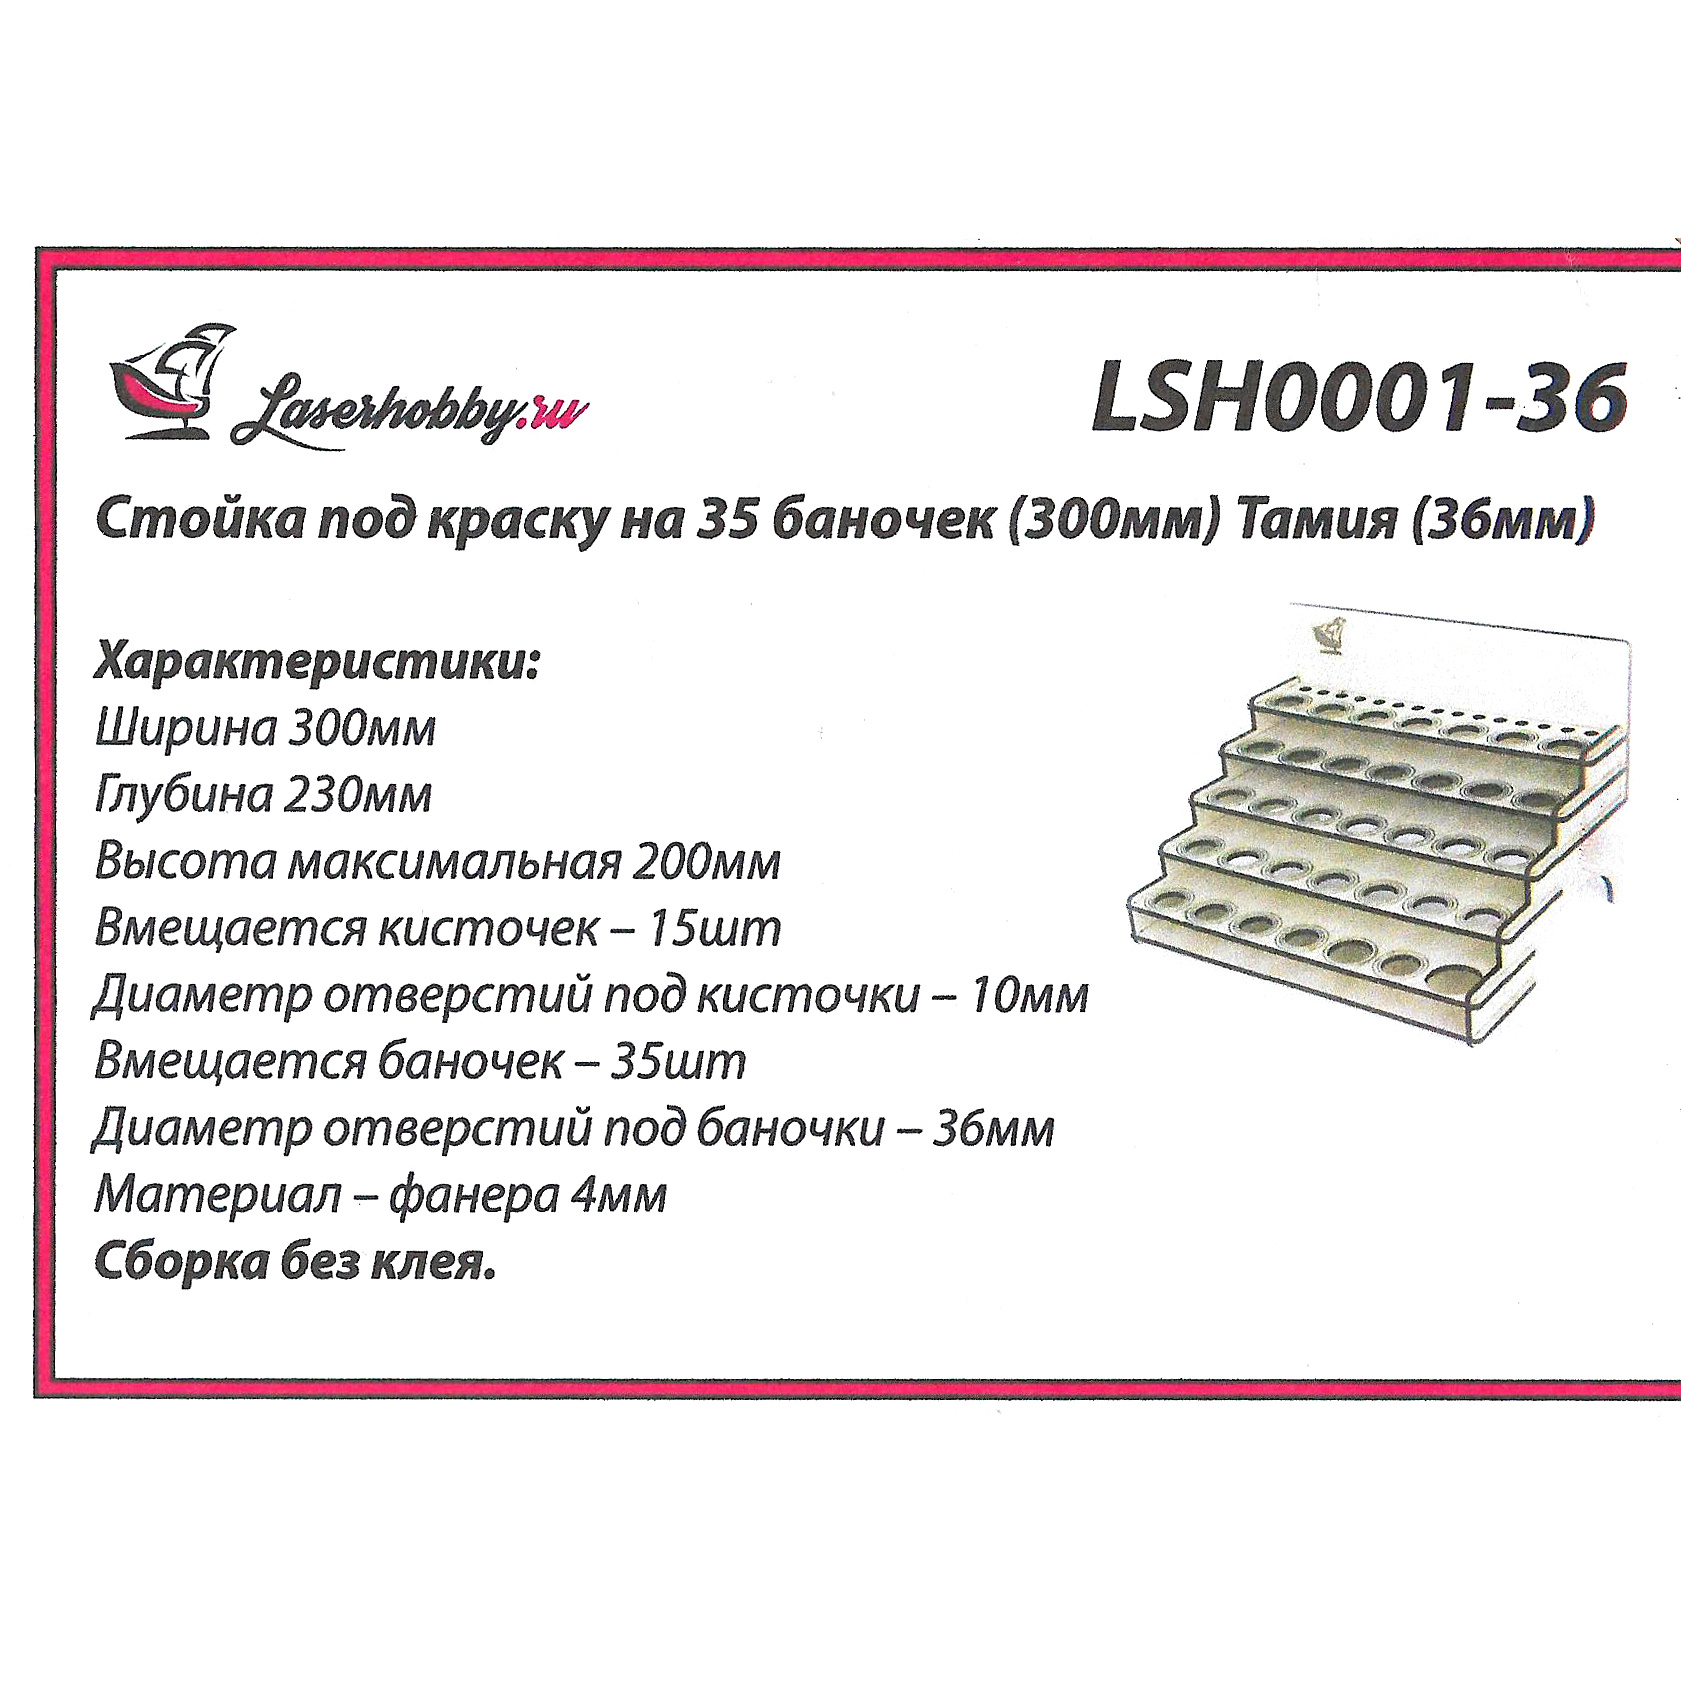 LSH0001-36 Laser Hobby Paint Rack for 35 cans (300 mm) Tamiya (36 mm)